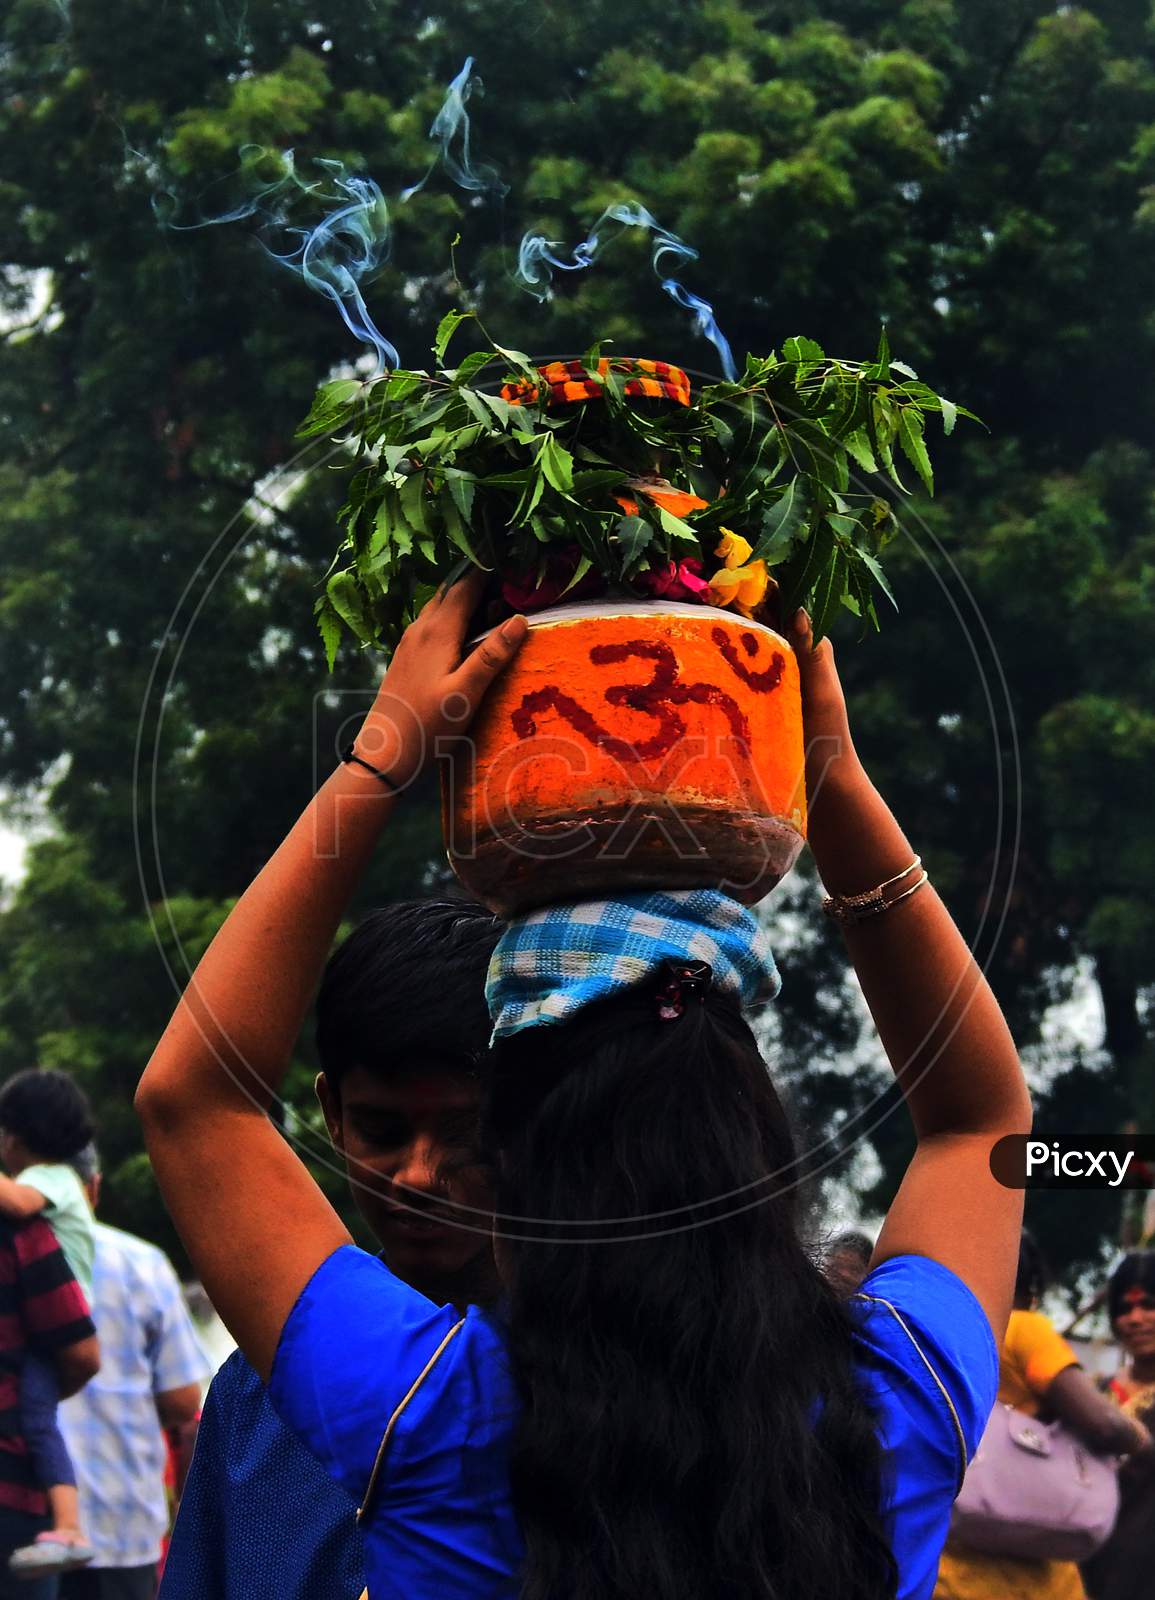 Indian Hindu Woman Carry Bonam To Temple, A Food Offering To Goddess Durga During Bonalu Festival